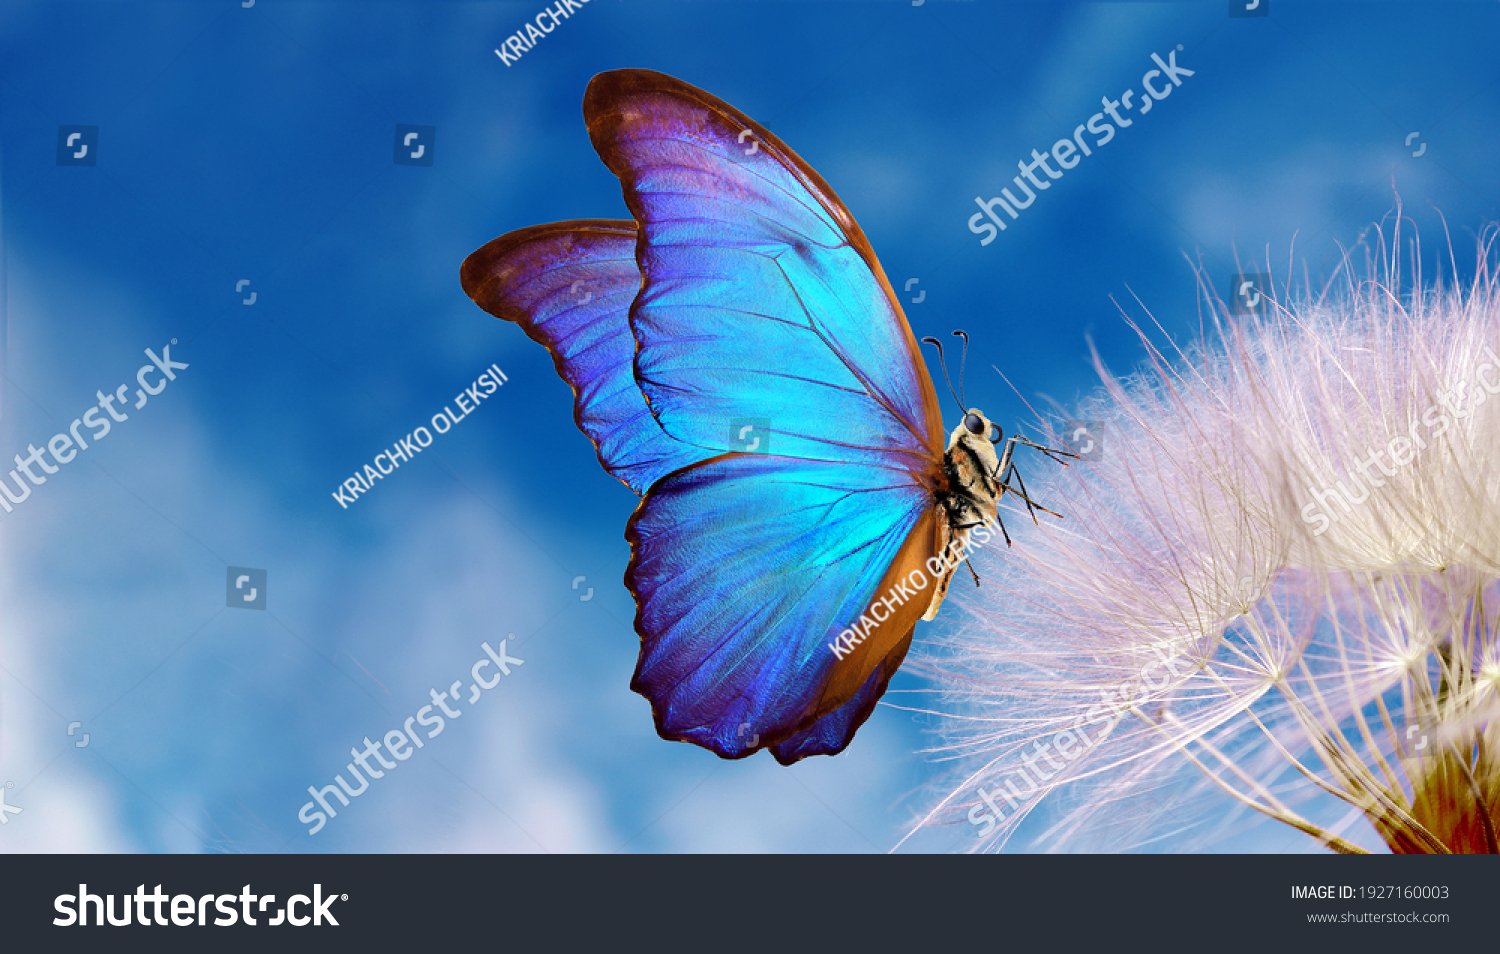 Natural pastel background. Morpho butterfly and dandelion. Seeds of a dandelion flower on a background of blue sky with clouds. Copy spaces #1927160003